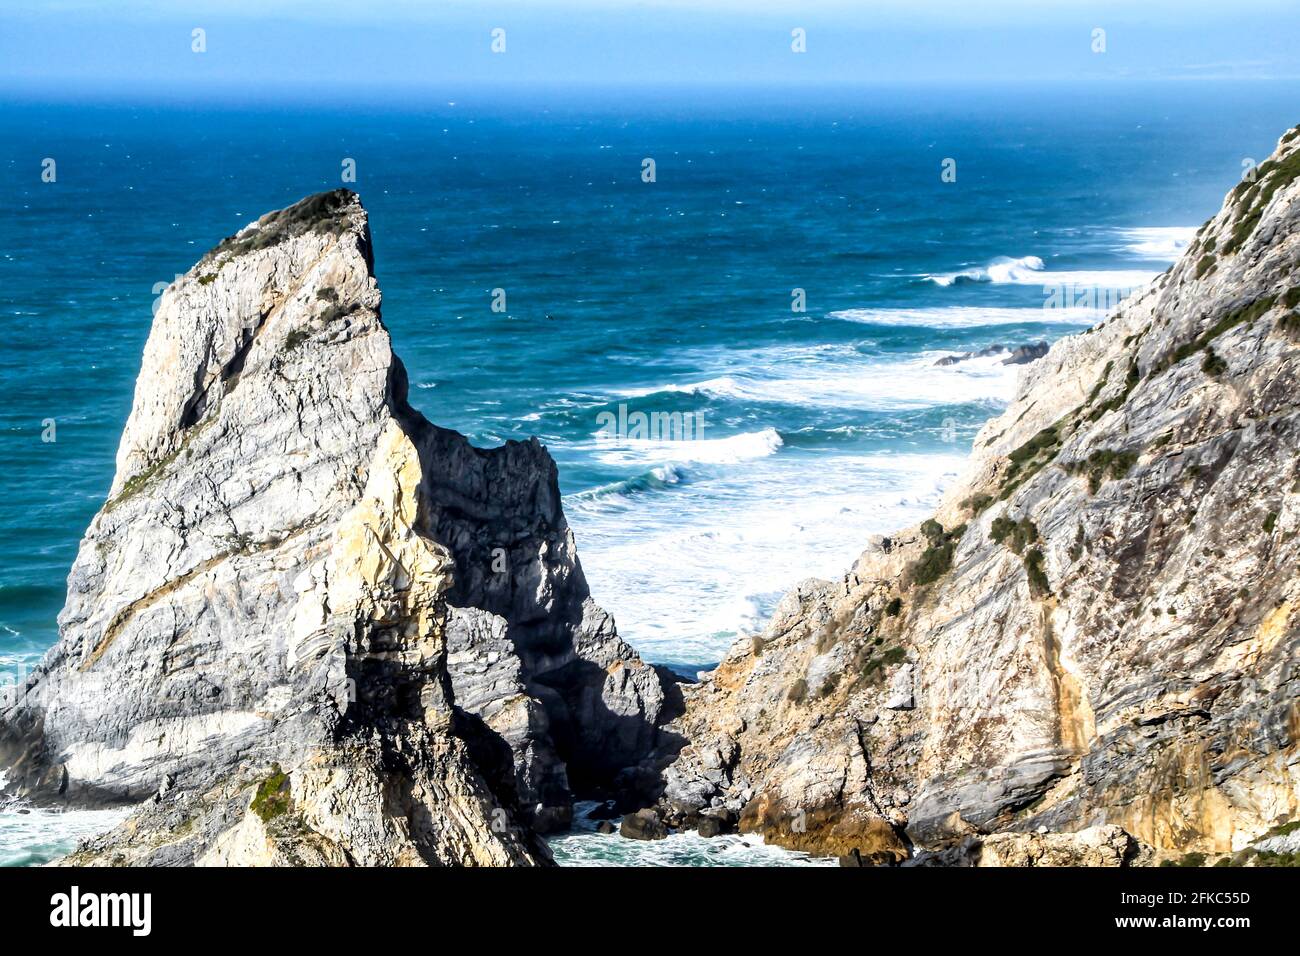 Beautiful Ursa beach with its colossal rock formations and the blue Atlantic Ocean Stock Photo